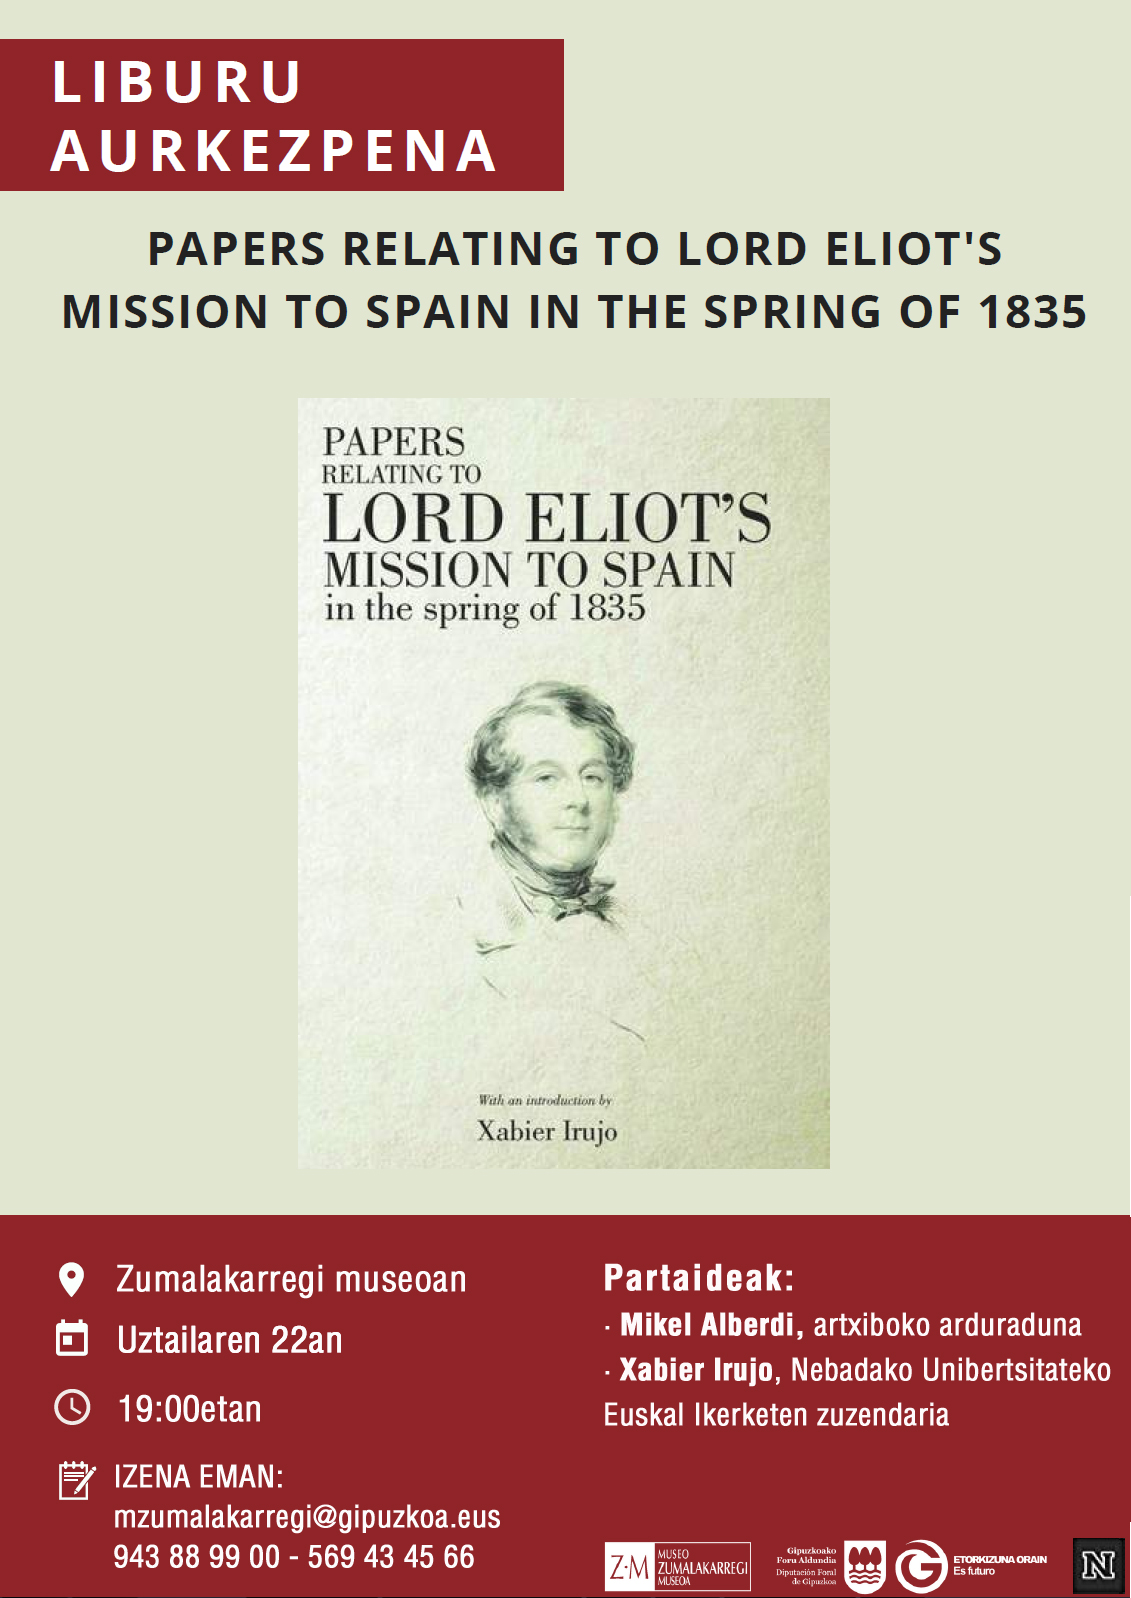 Papers Relating to Lord Eliot's Mission to Spain in the Spring of 1835 liburuaren aurkezpena